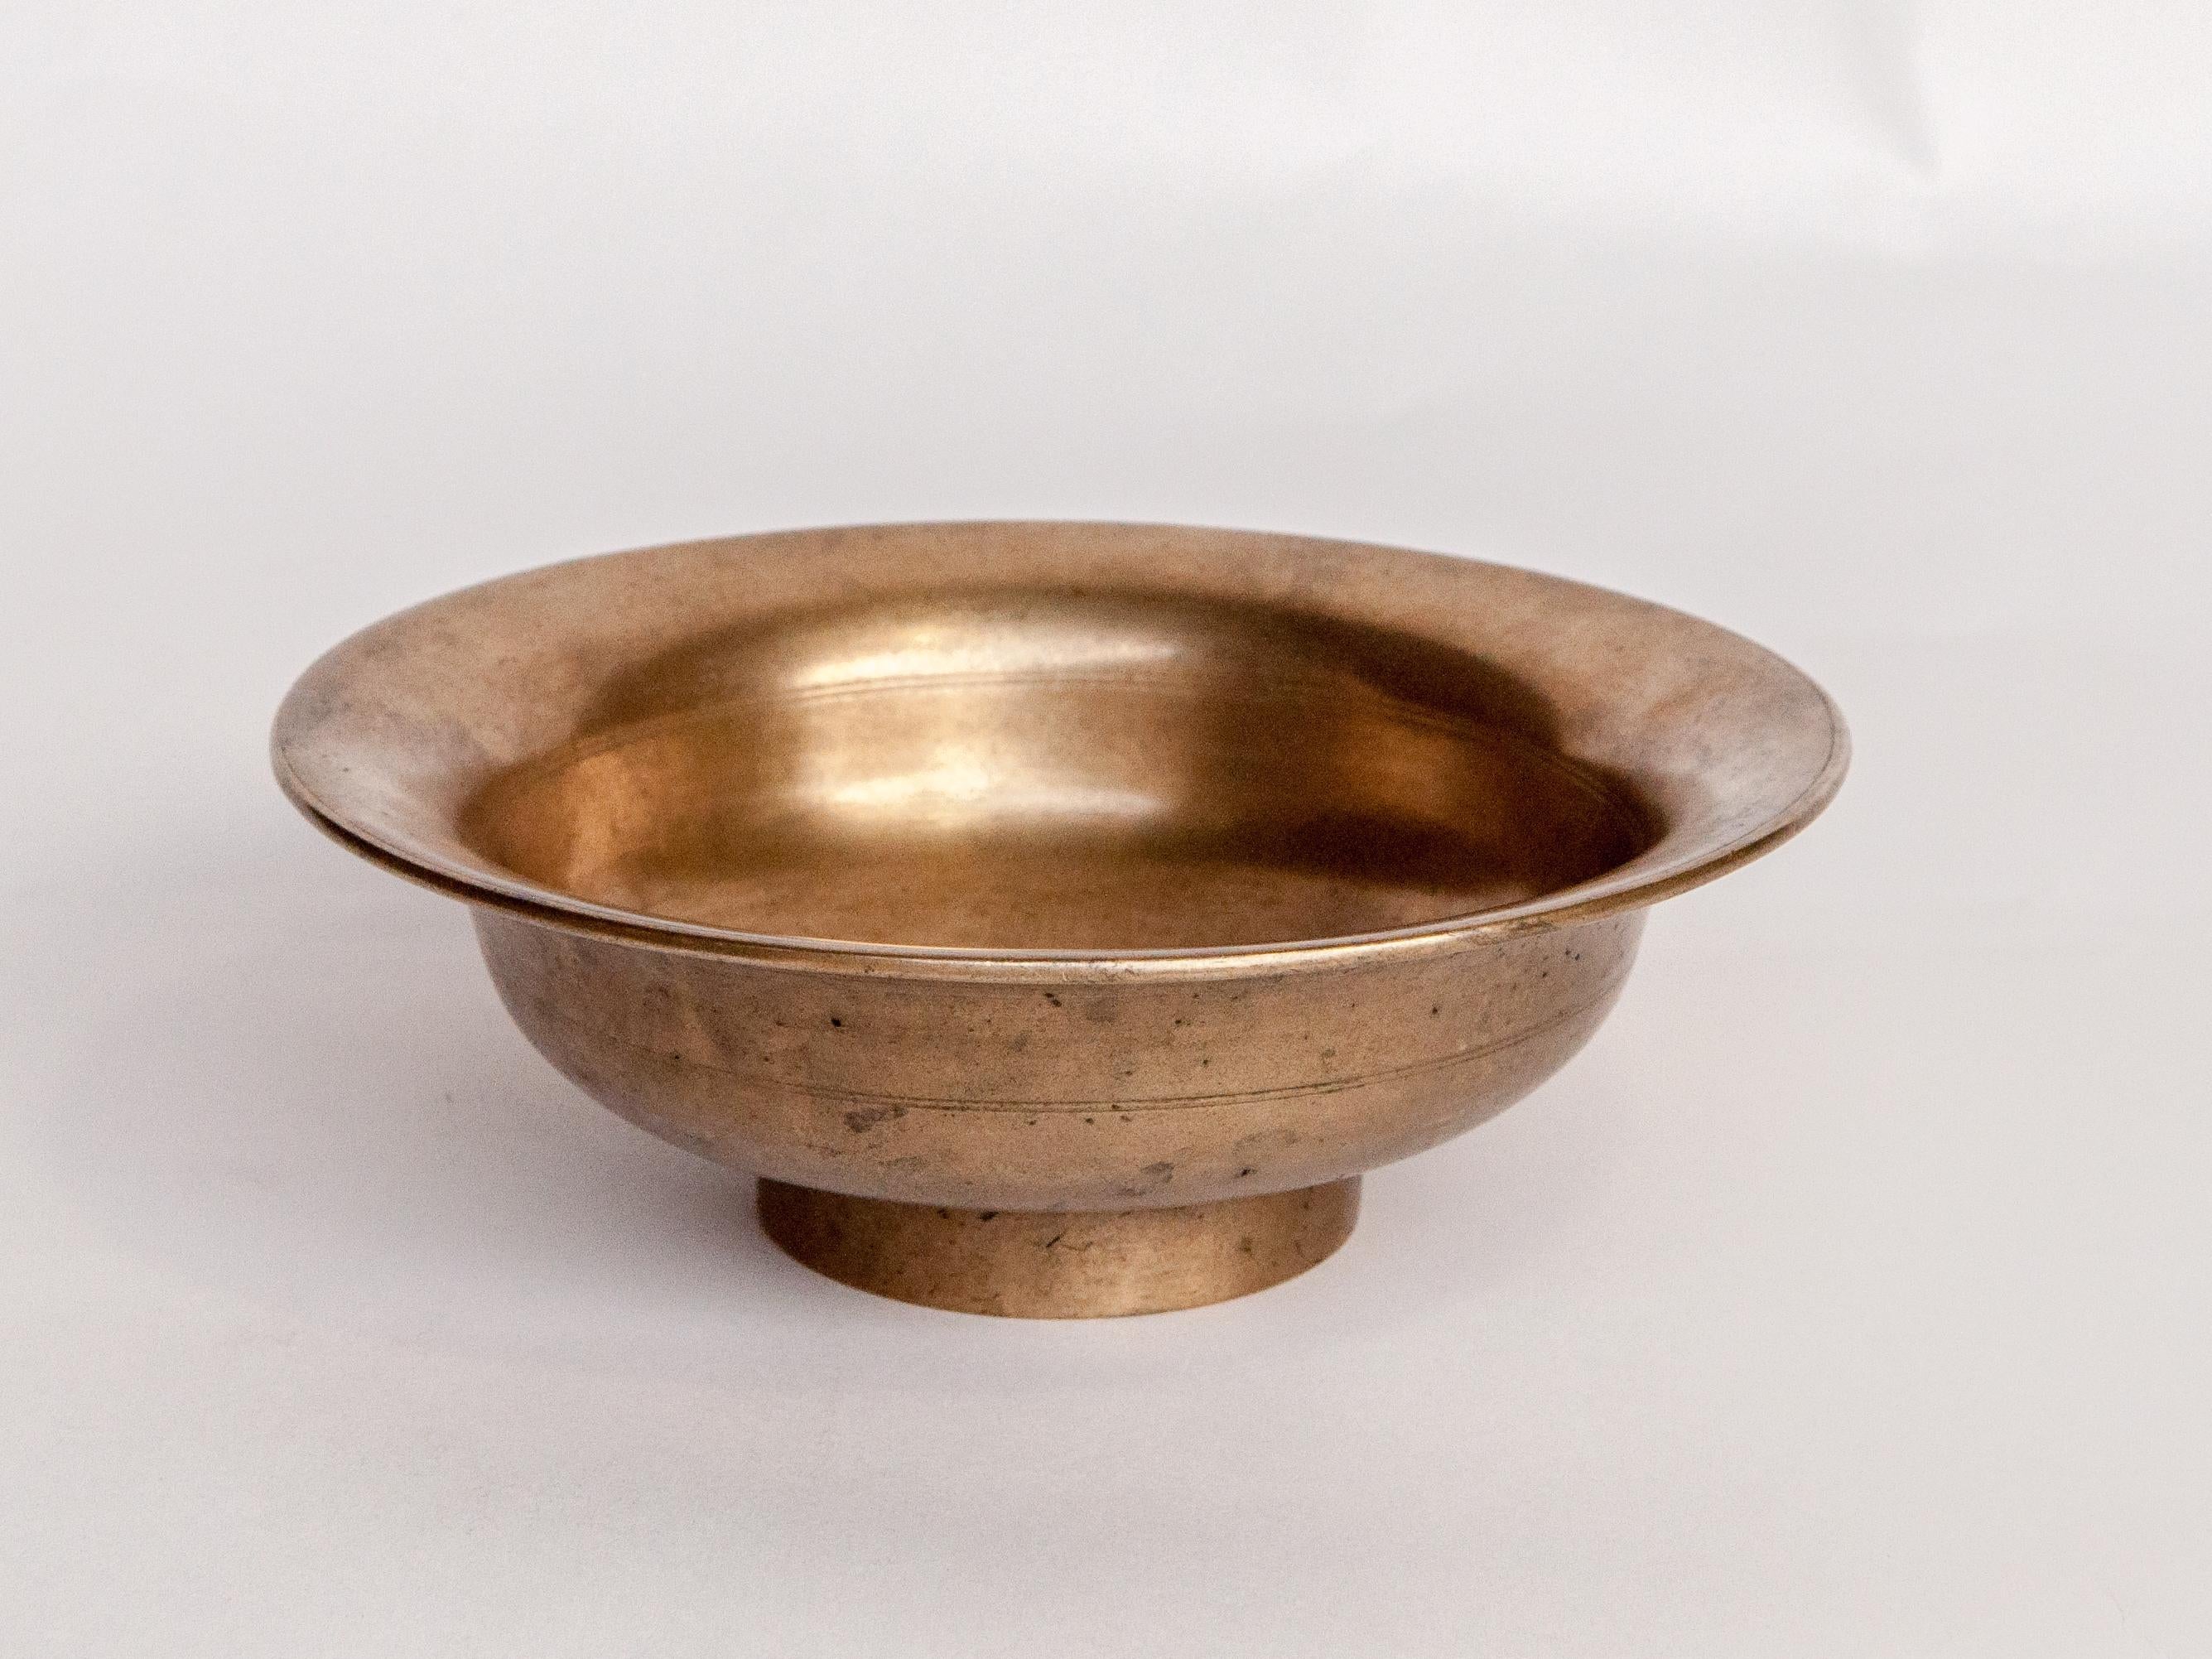 Vintage Tibetan / Nepali Tsampa bowl, bronze. From Nepal, early to mid-20th century.
Tsampa is a Tibetan staple found throughout Tibet as well as among the Tibetan speaking peoples of the high Himalayan valleys of the India / Nepal / Tibet